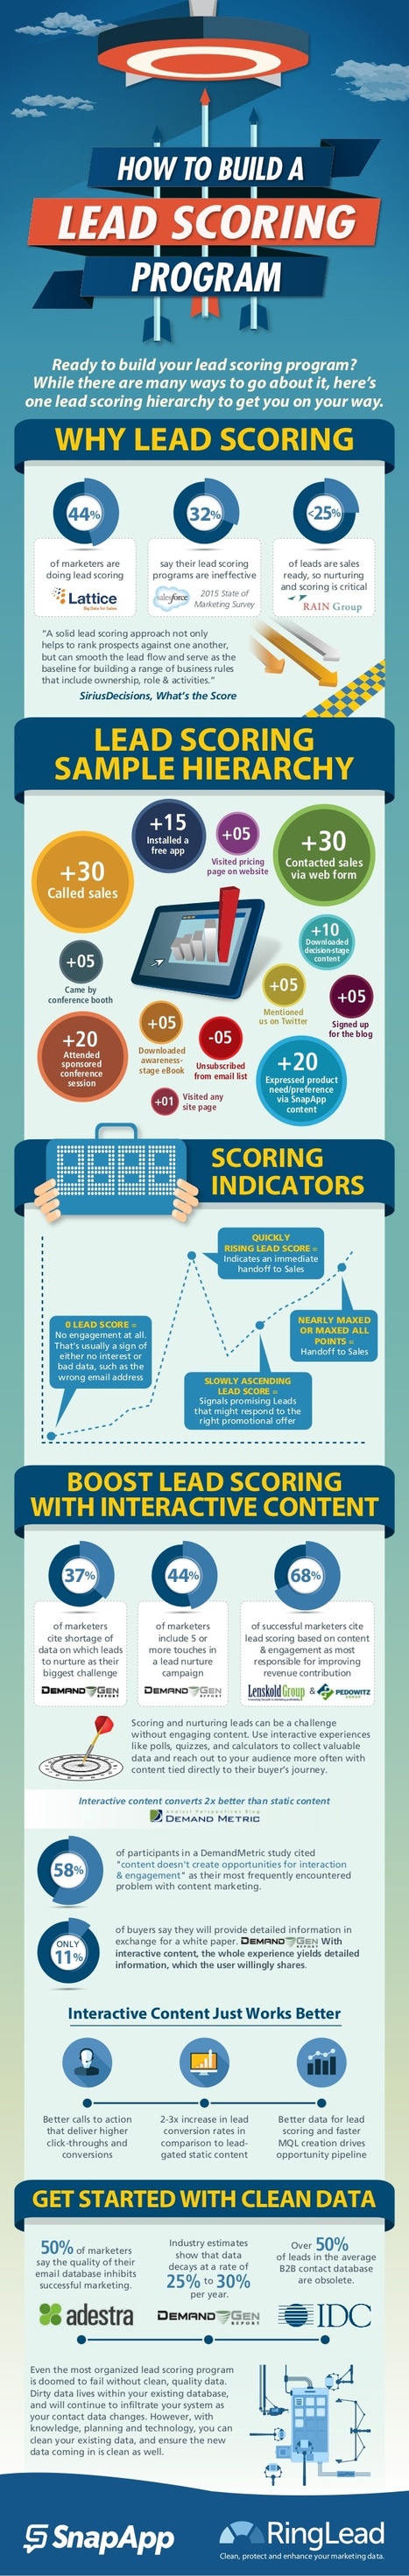 Lead Scoring 101: How to Build a Hierarchy [Infographic] - Pardot | The MarTech Digest | Scoop.it